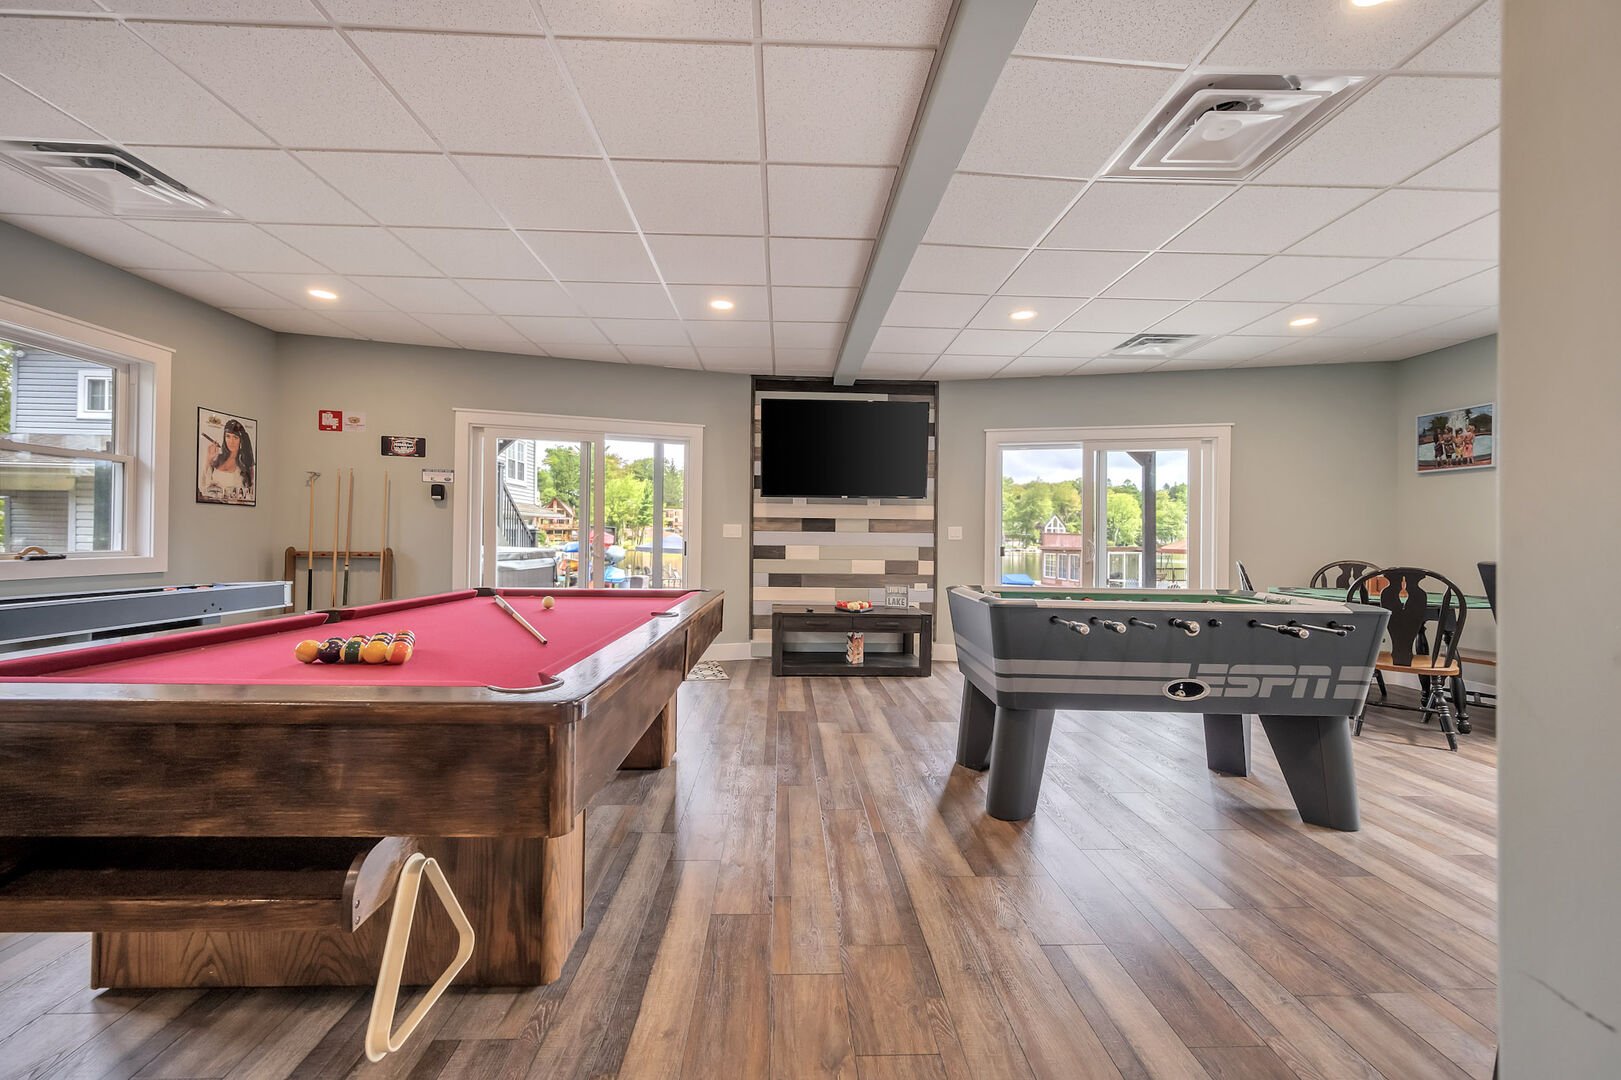 Game Room with Pool Table, Shuffleboard, Foosball, Poker Table and TV area